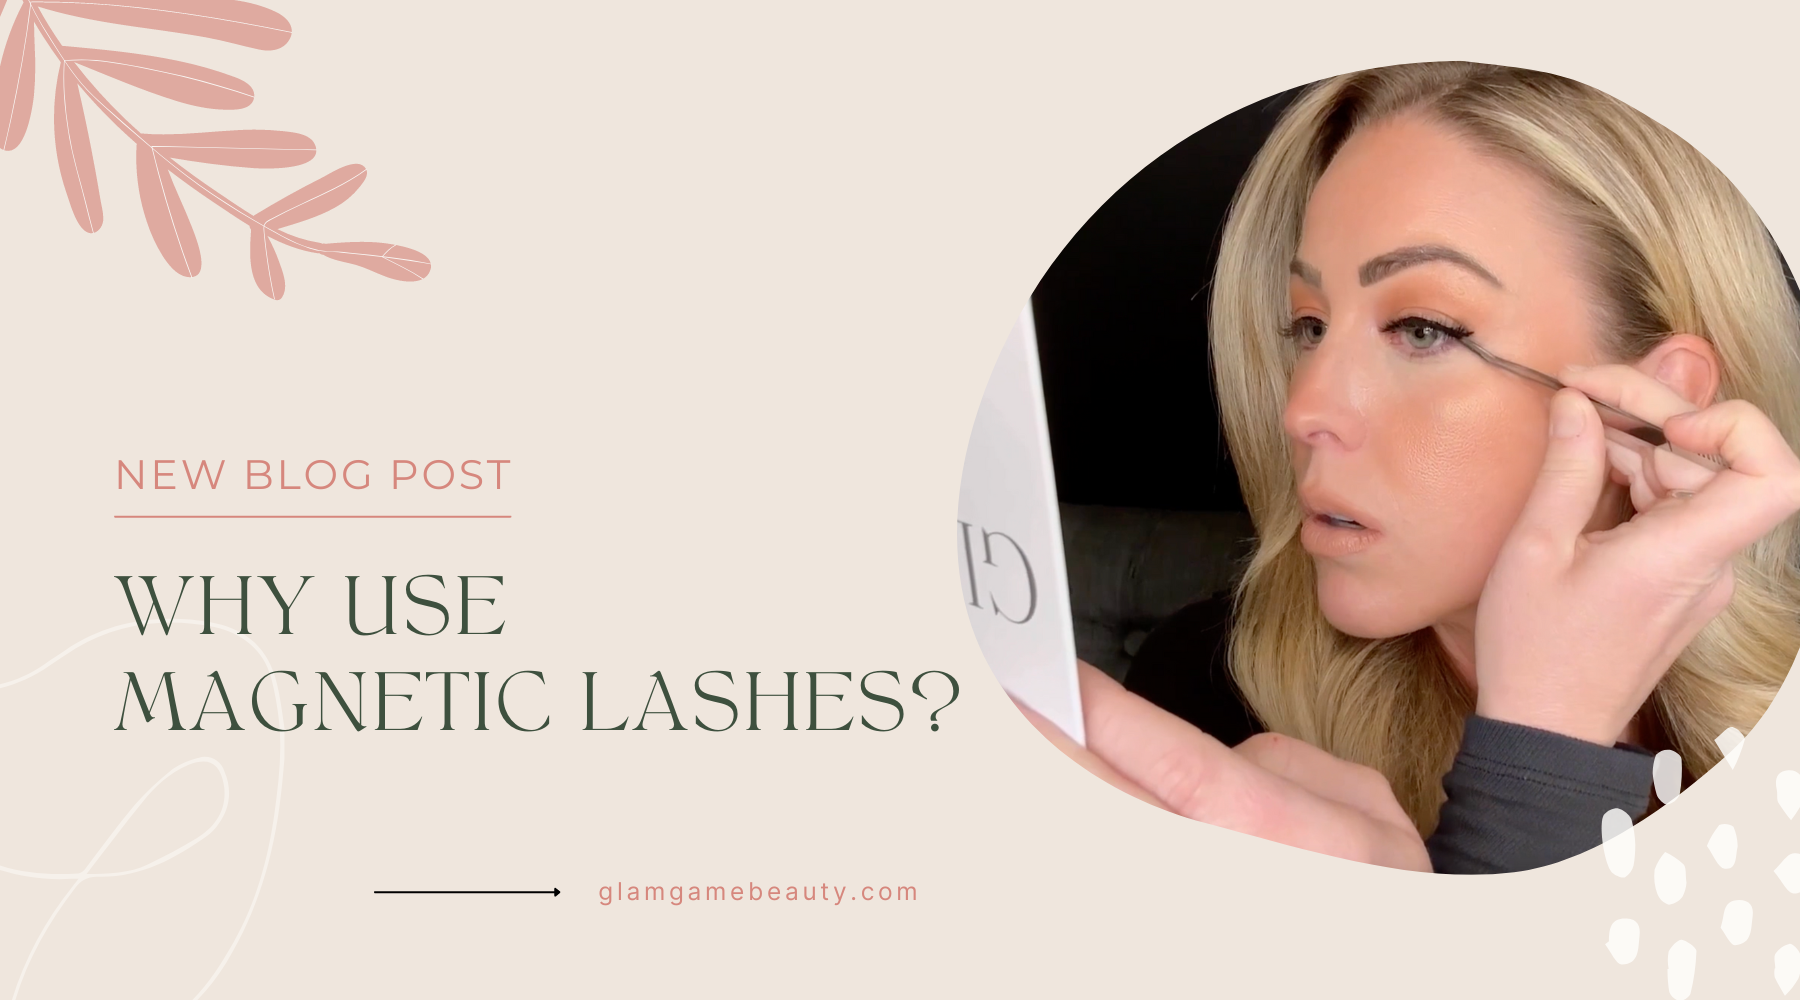 Why Use Magnetic Lashes?